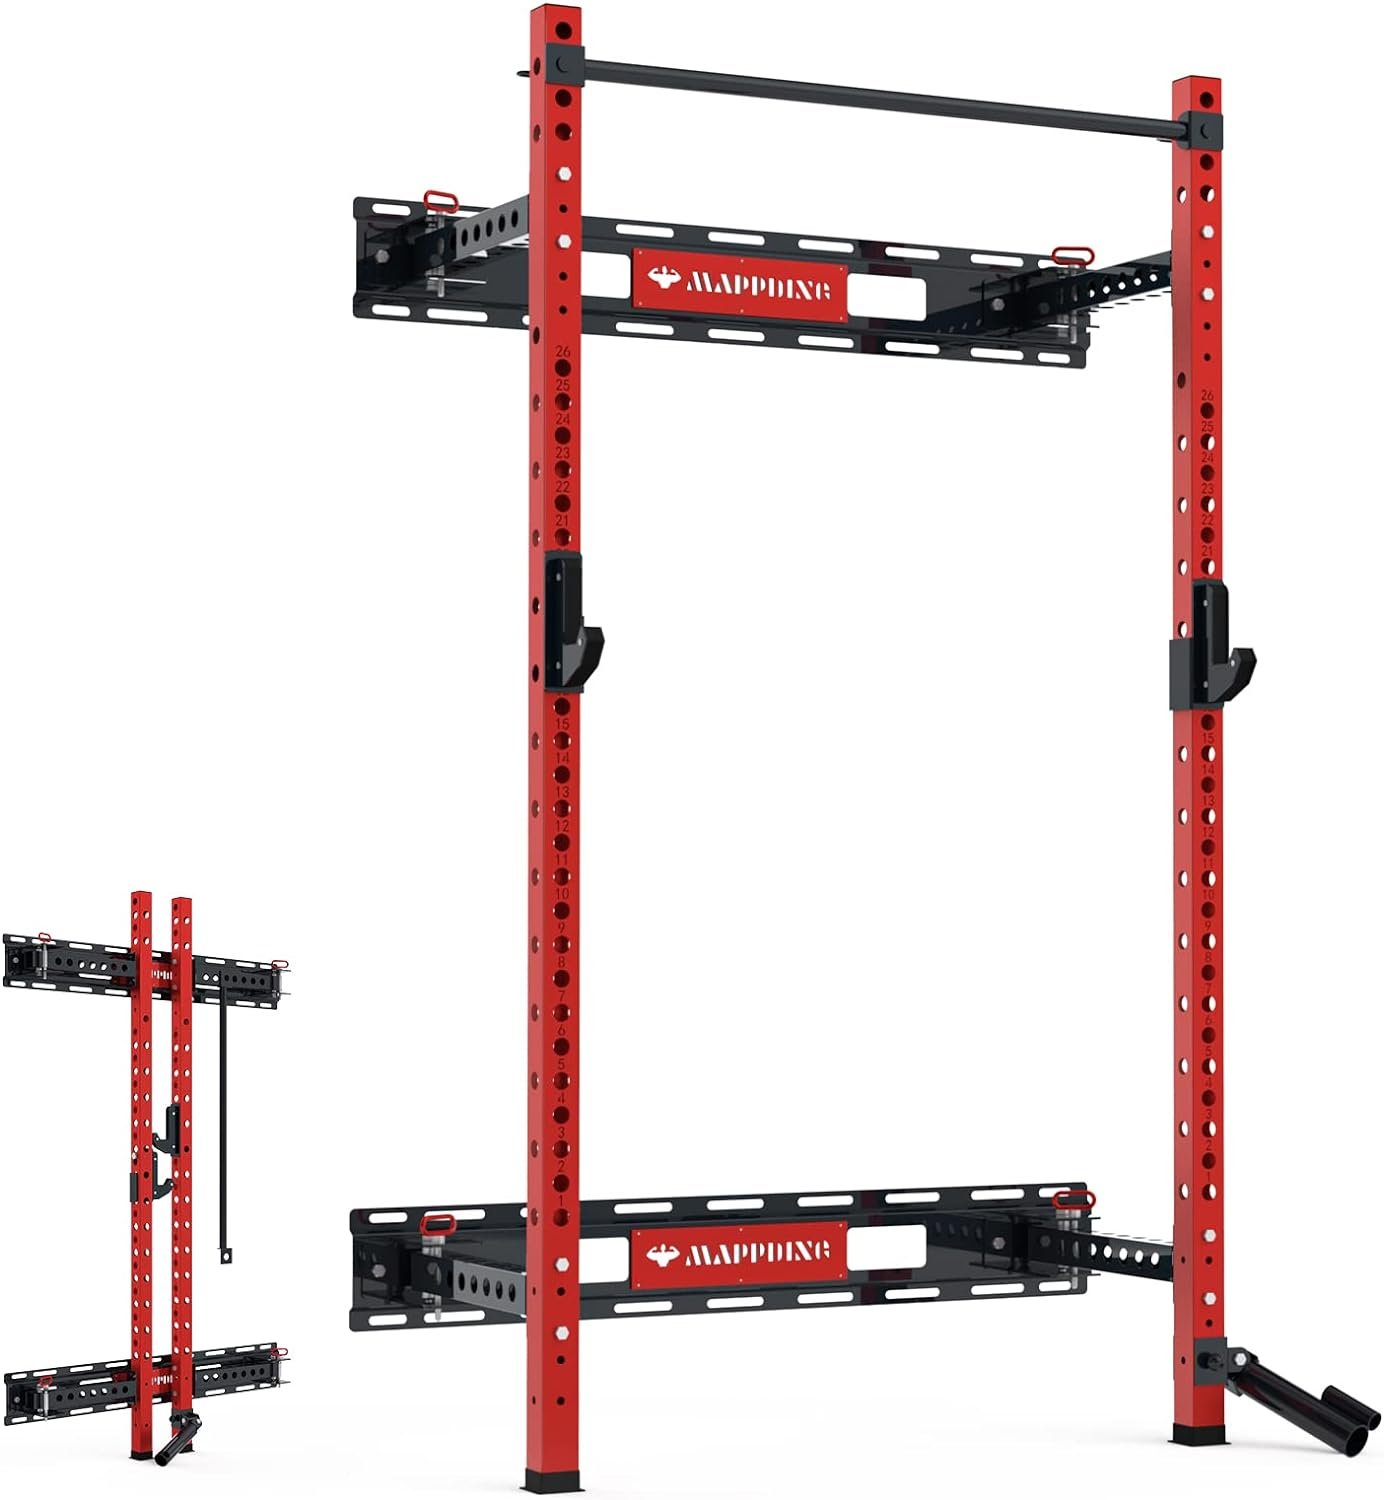 Mappding Folding Squat Rack Wall Mounted with Weight Bench, 1100LBS Foldable Squat Power Rack Weight Cage with Pull Up Bar and Partable Space Saving Free Standing for Home Gym Garage Workout